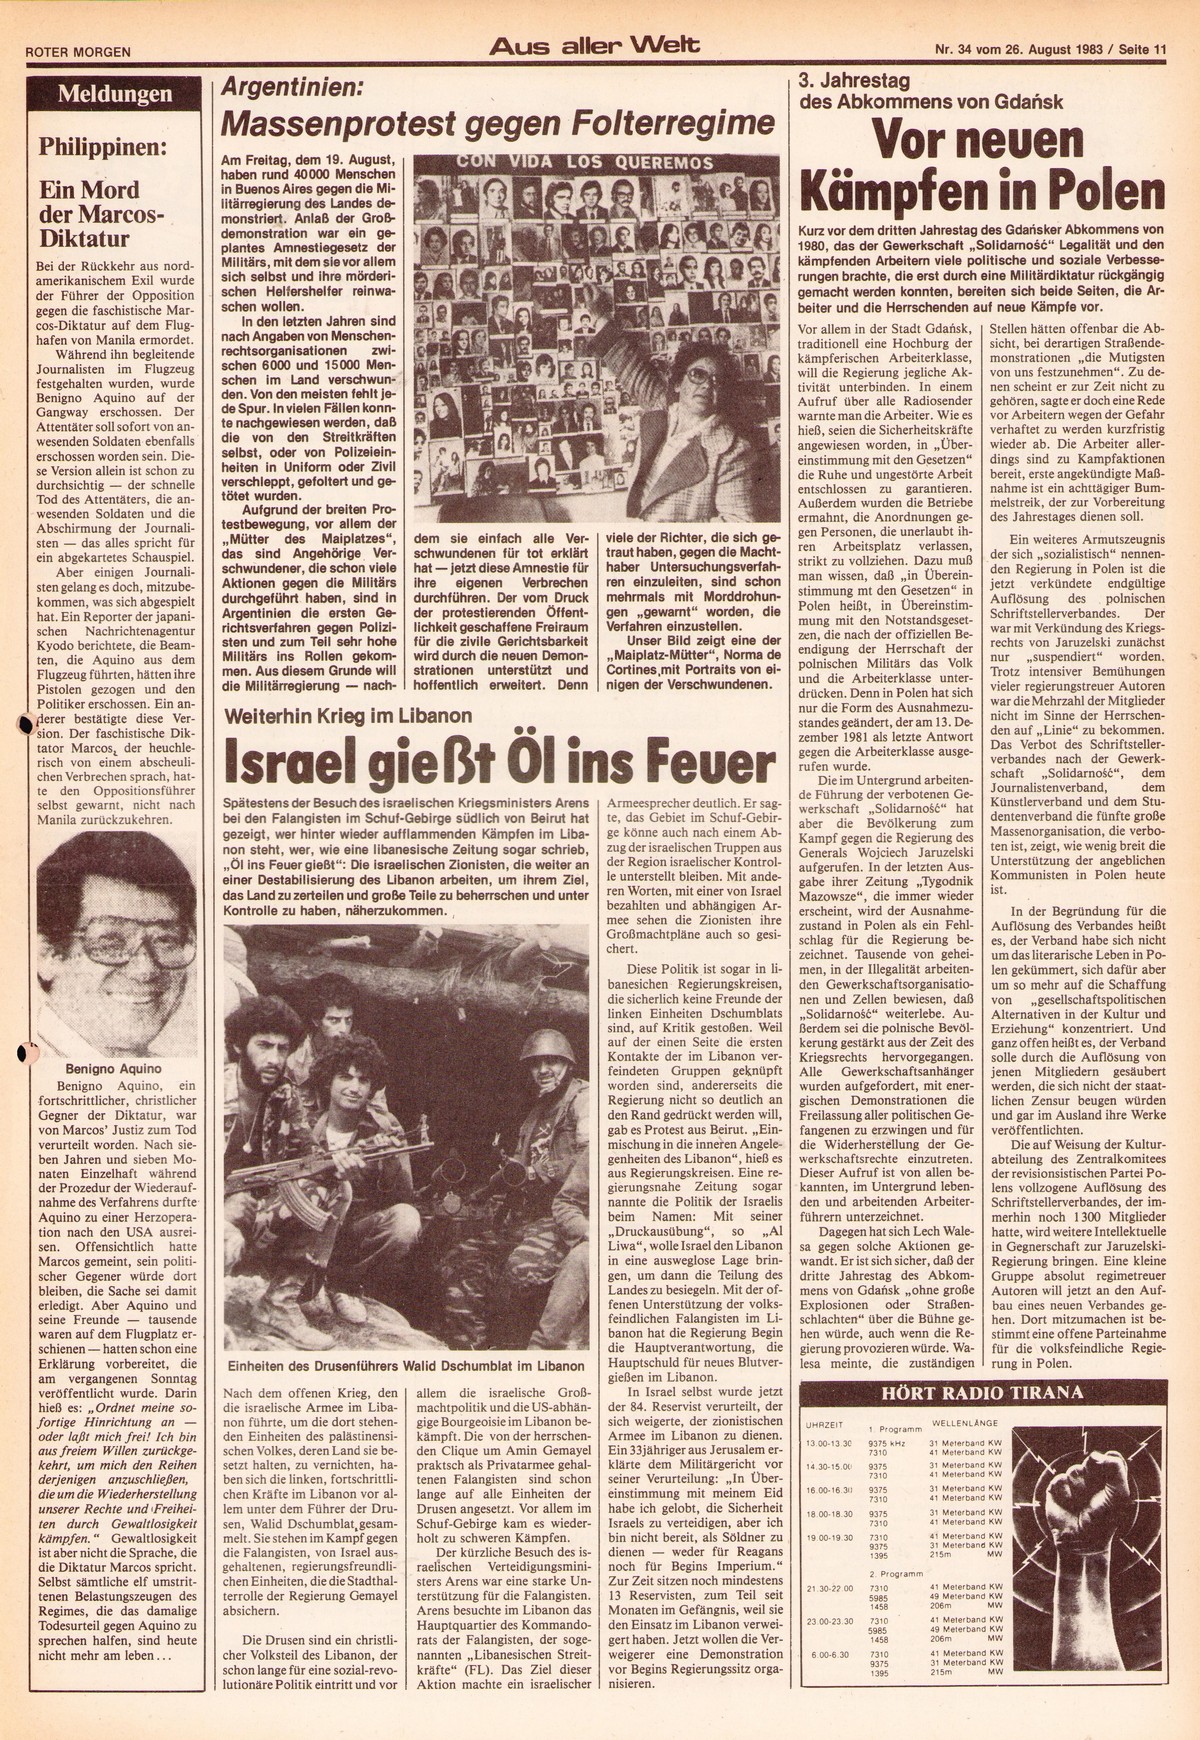 Roter Morgen, 17. Jg., 26. August 1983, Nr. 34, Seite 11